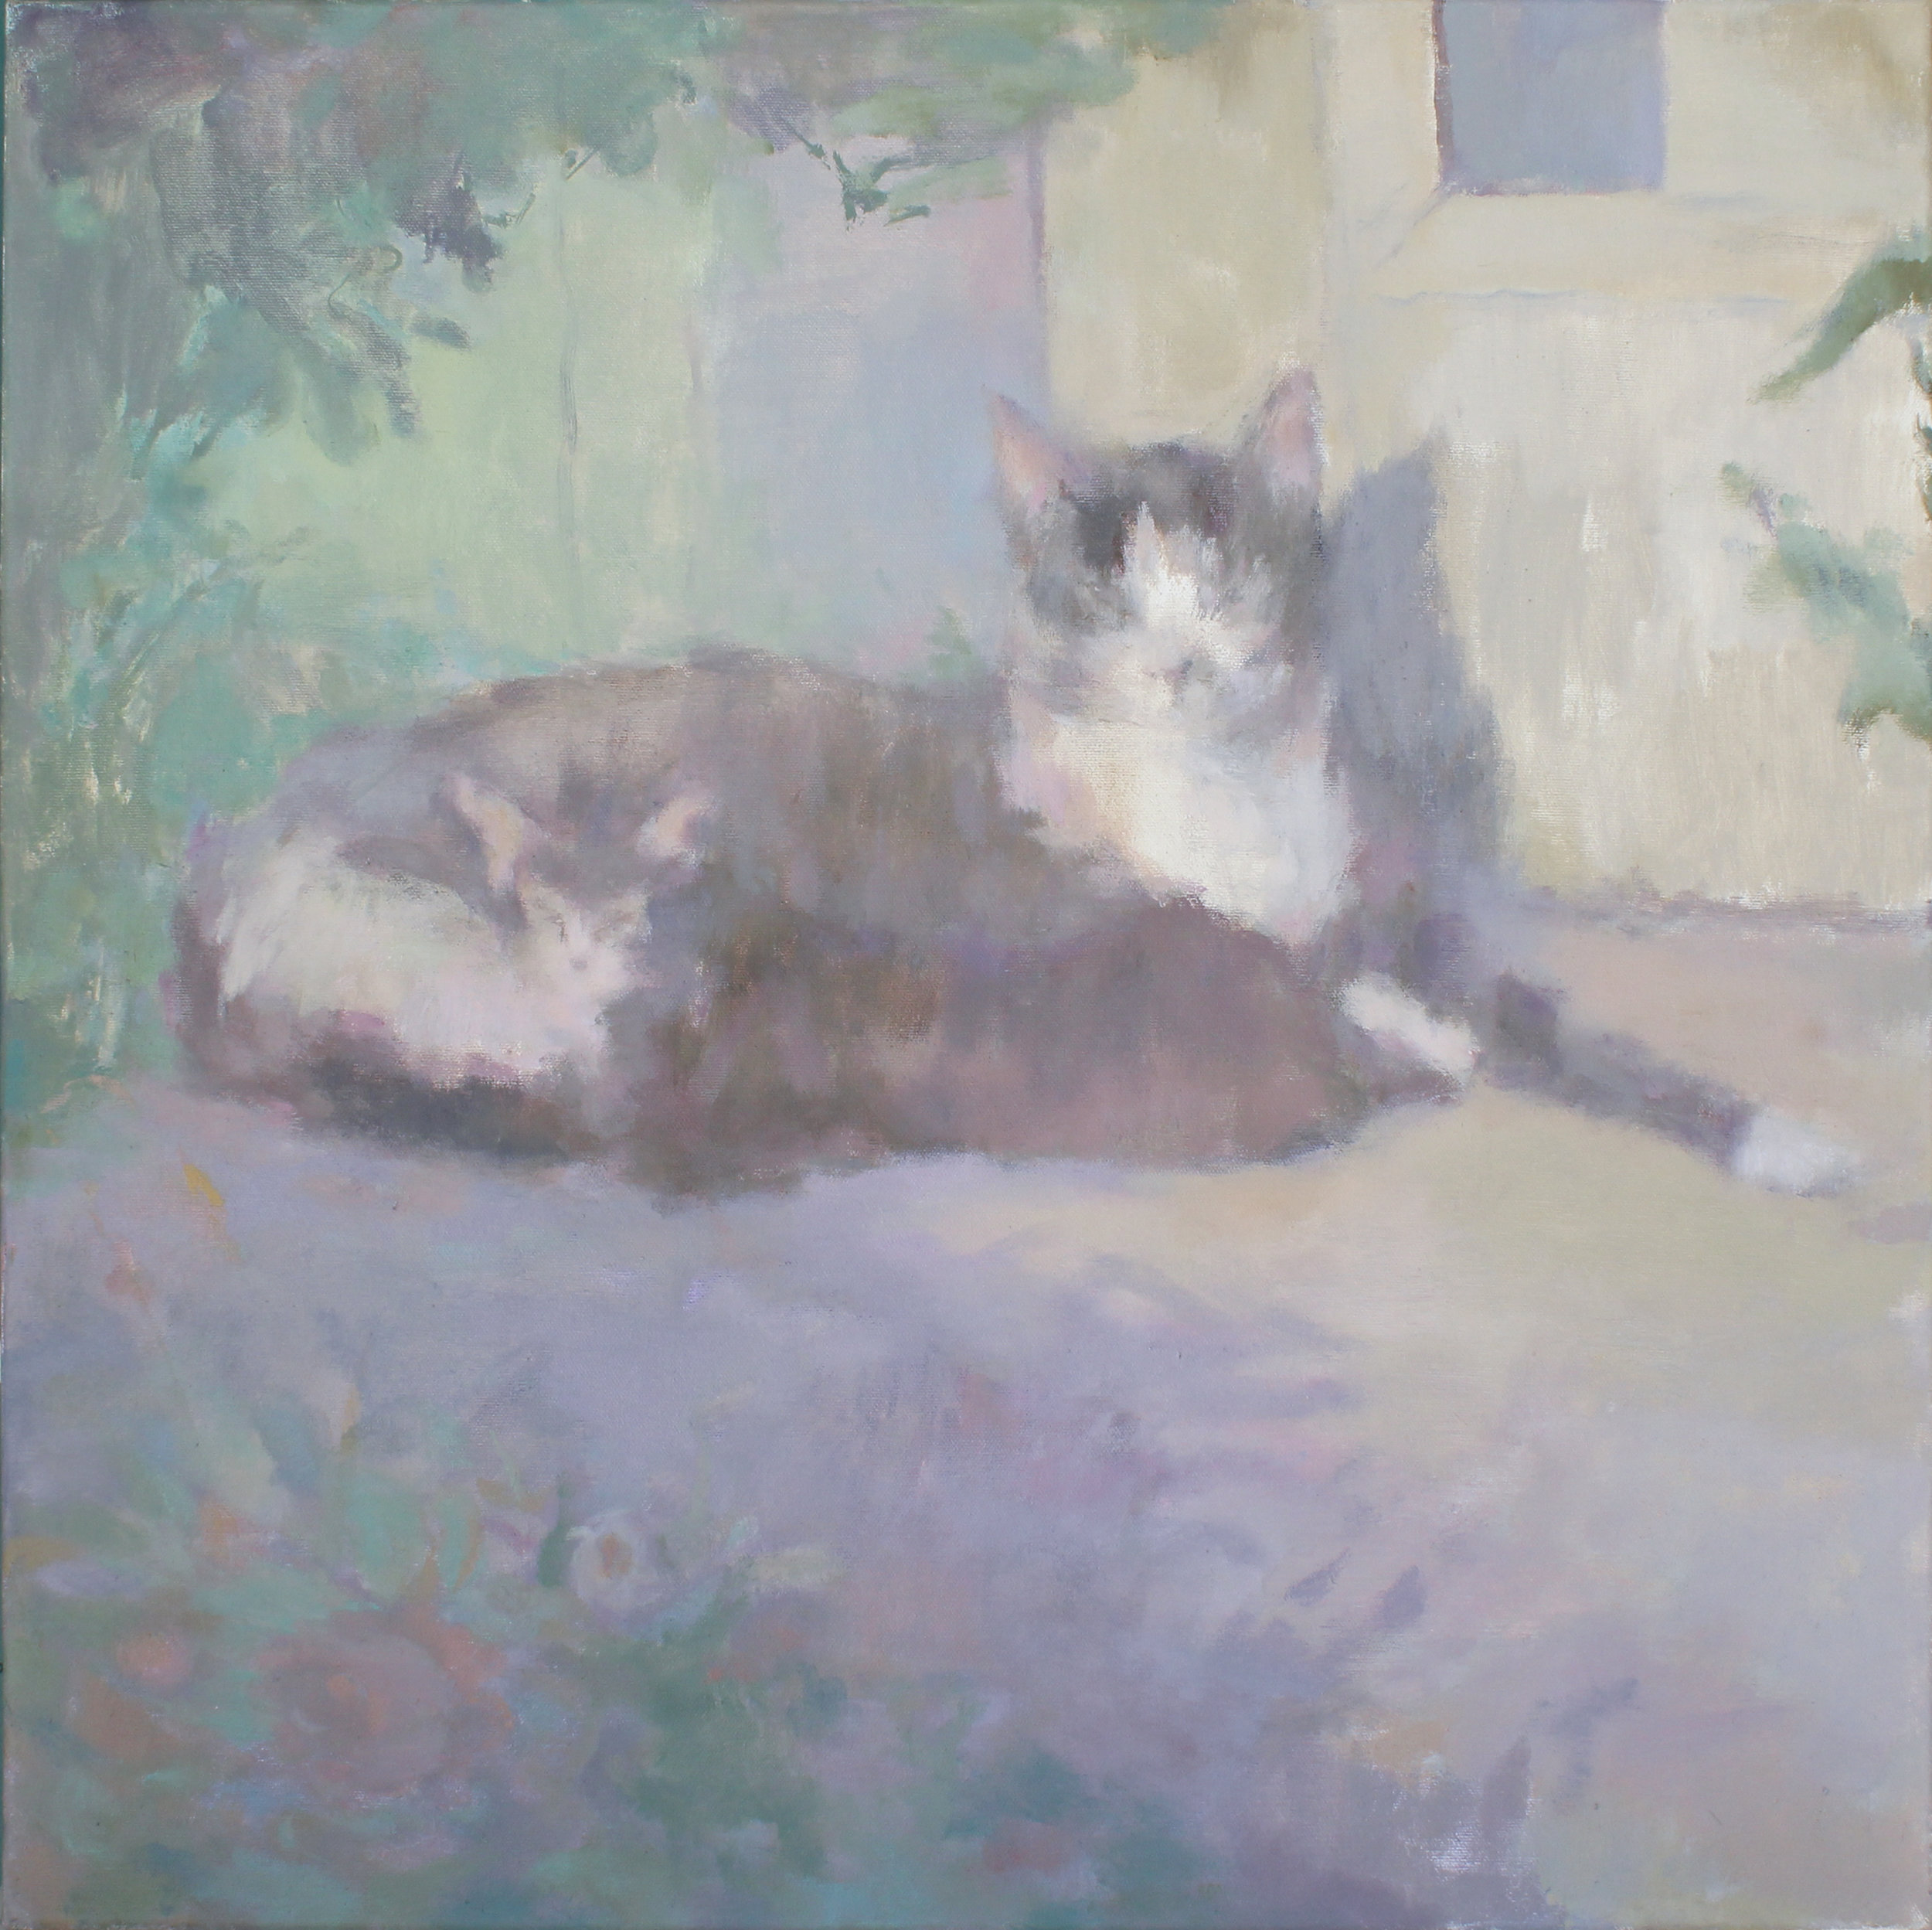    Shadow Cats   oil on canvas 24 x 24” 2019   purchase  